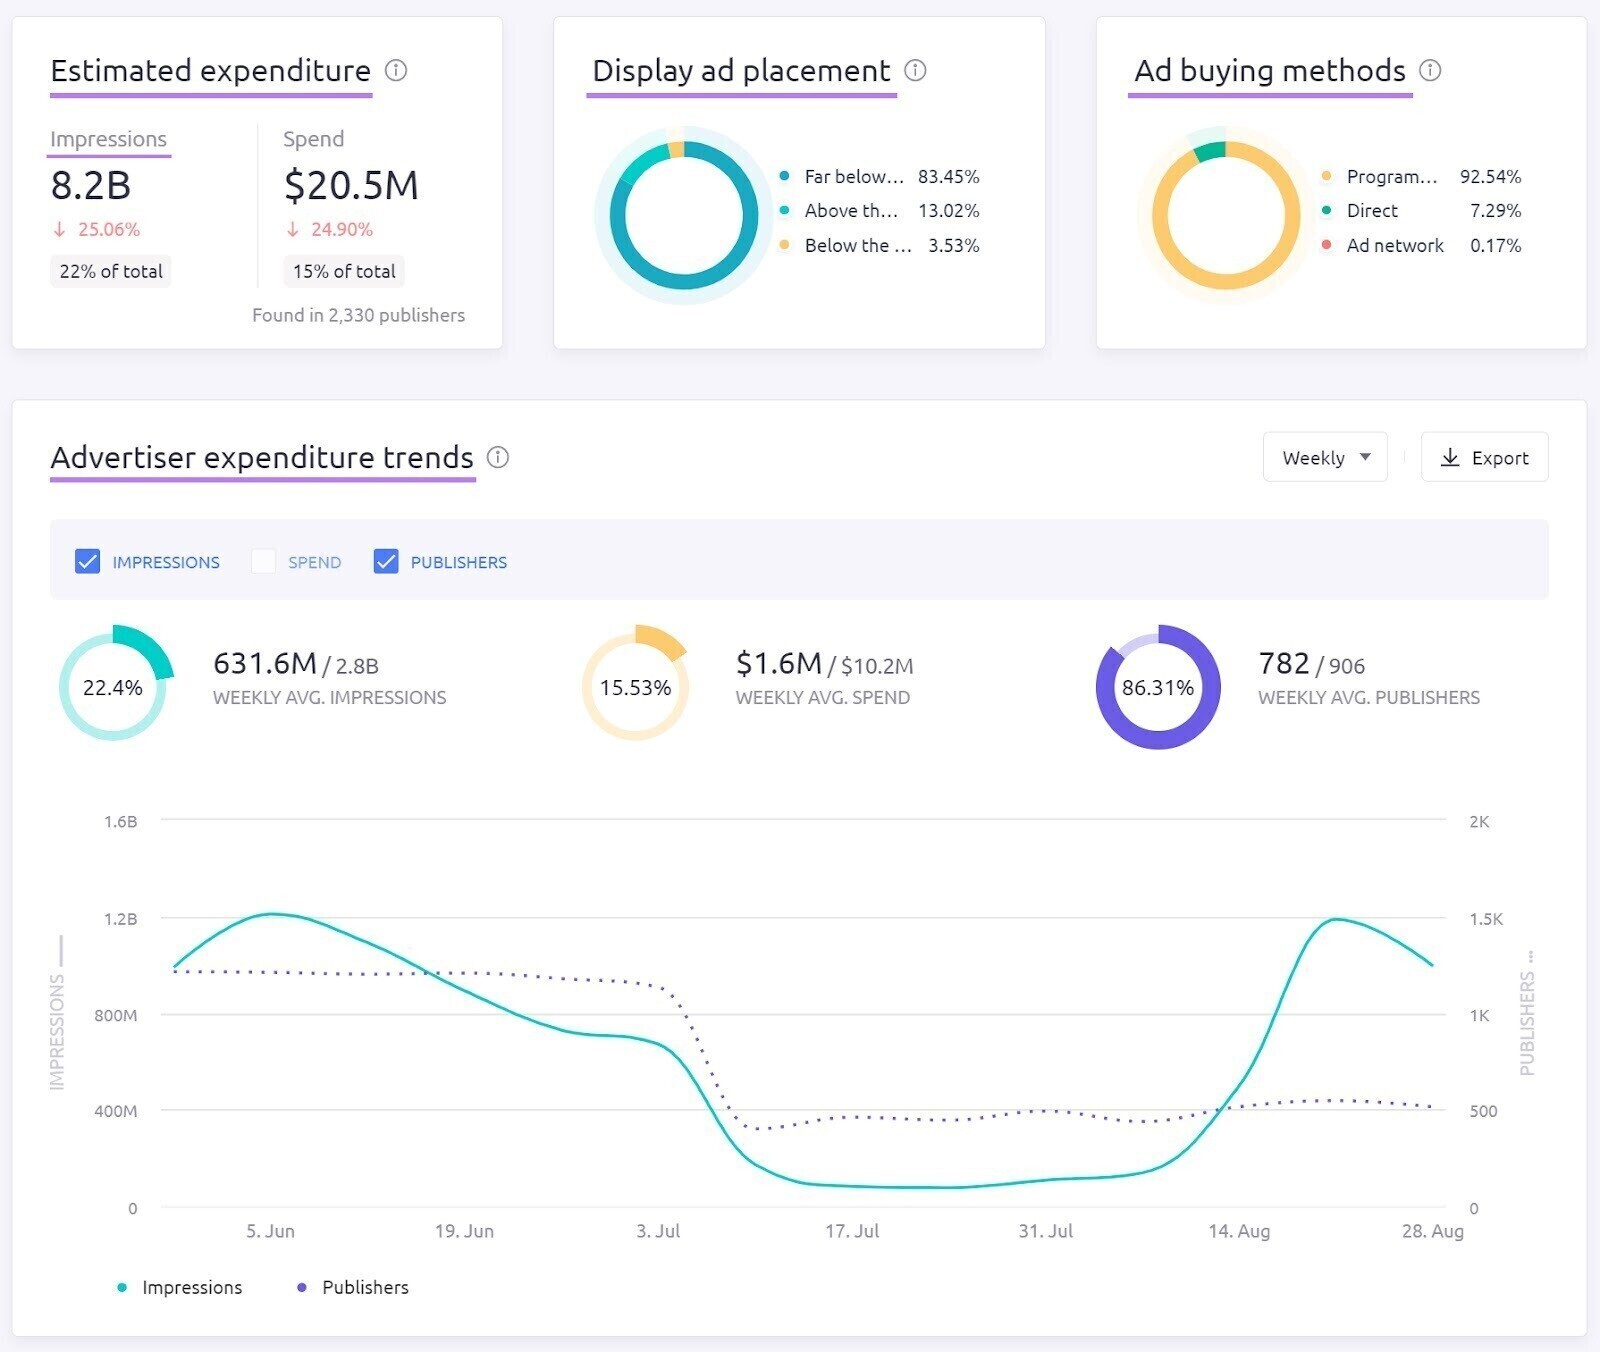 The AdClarity dashboard showing details of your your competitors' display ad campaigns like estimated expenditure, ad placement, buying methods and spending trends.